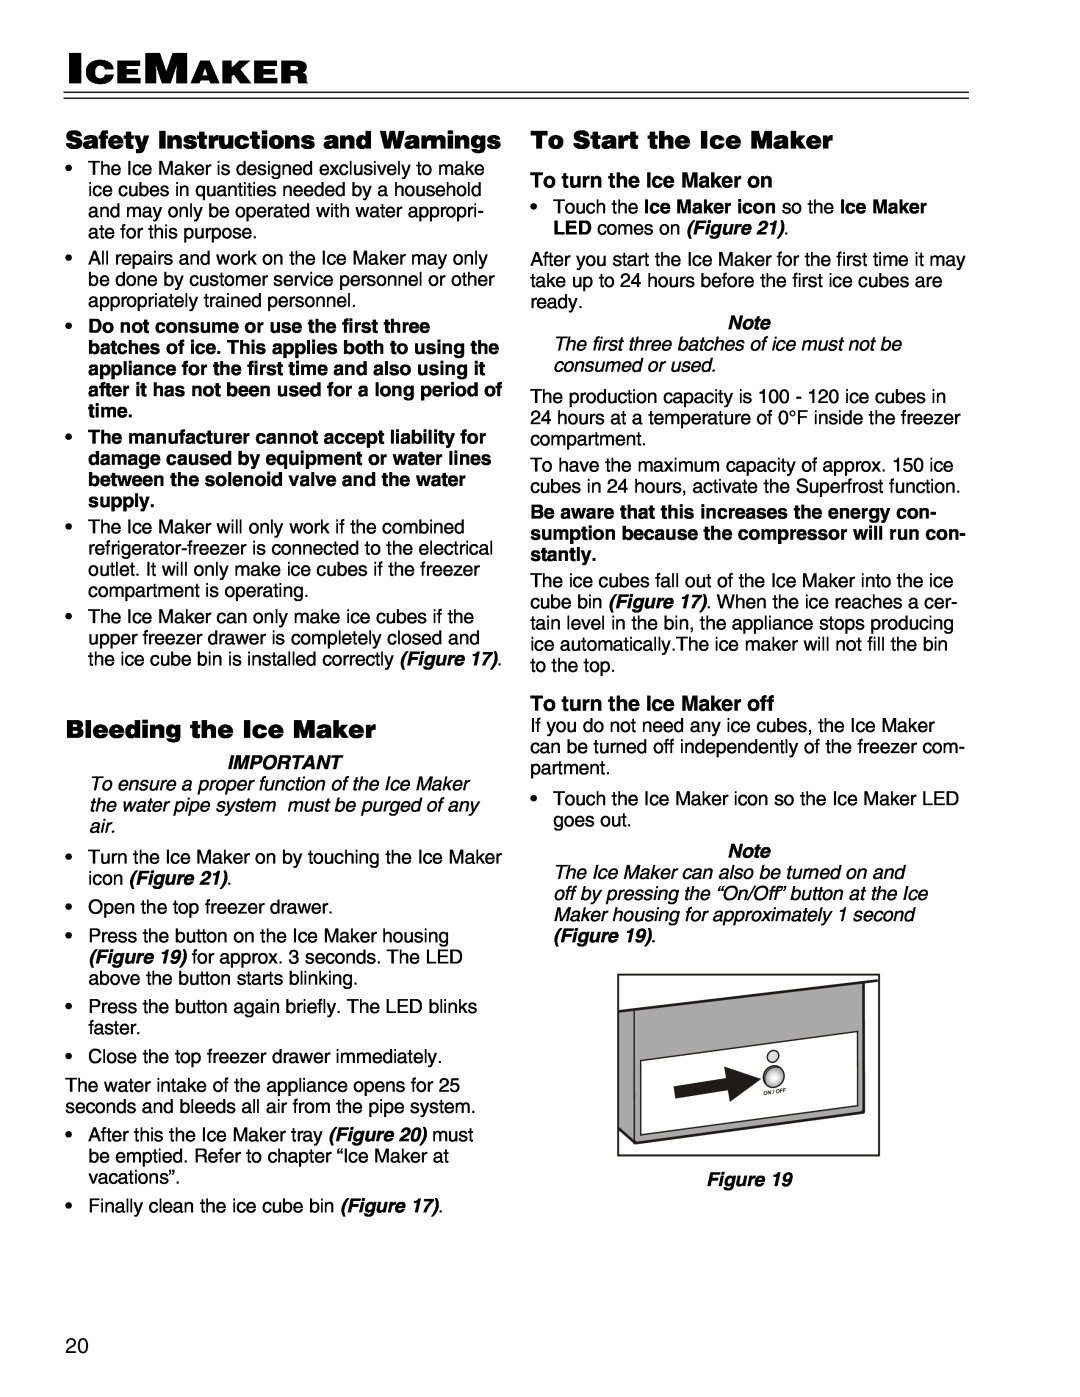 Liebherr HCS, 7081 411-01 manual IceMaker, Safety Instructions and Warnings, Bleeding the Ice Maker, To Start the Ice Maker 